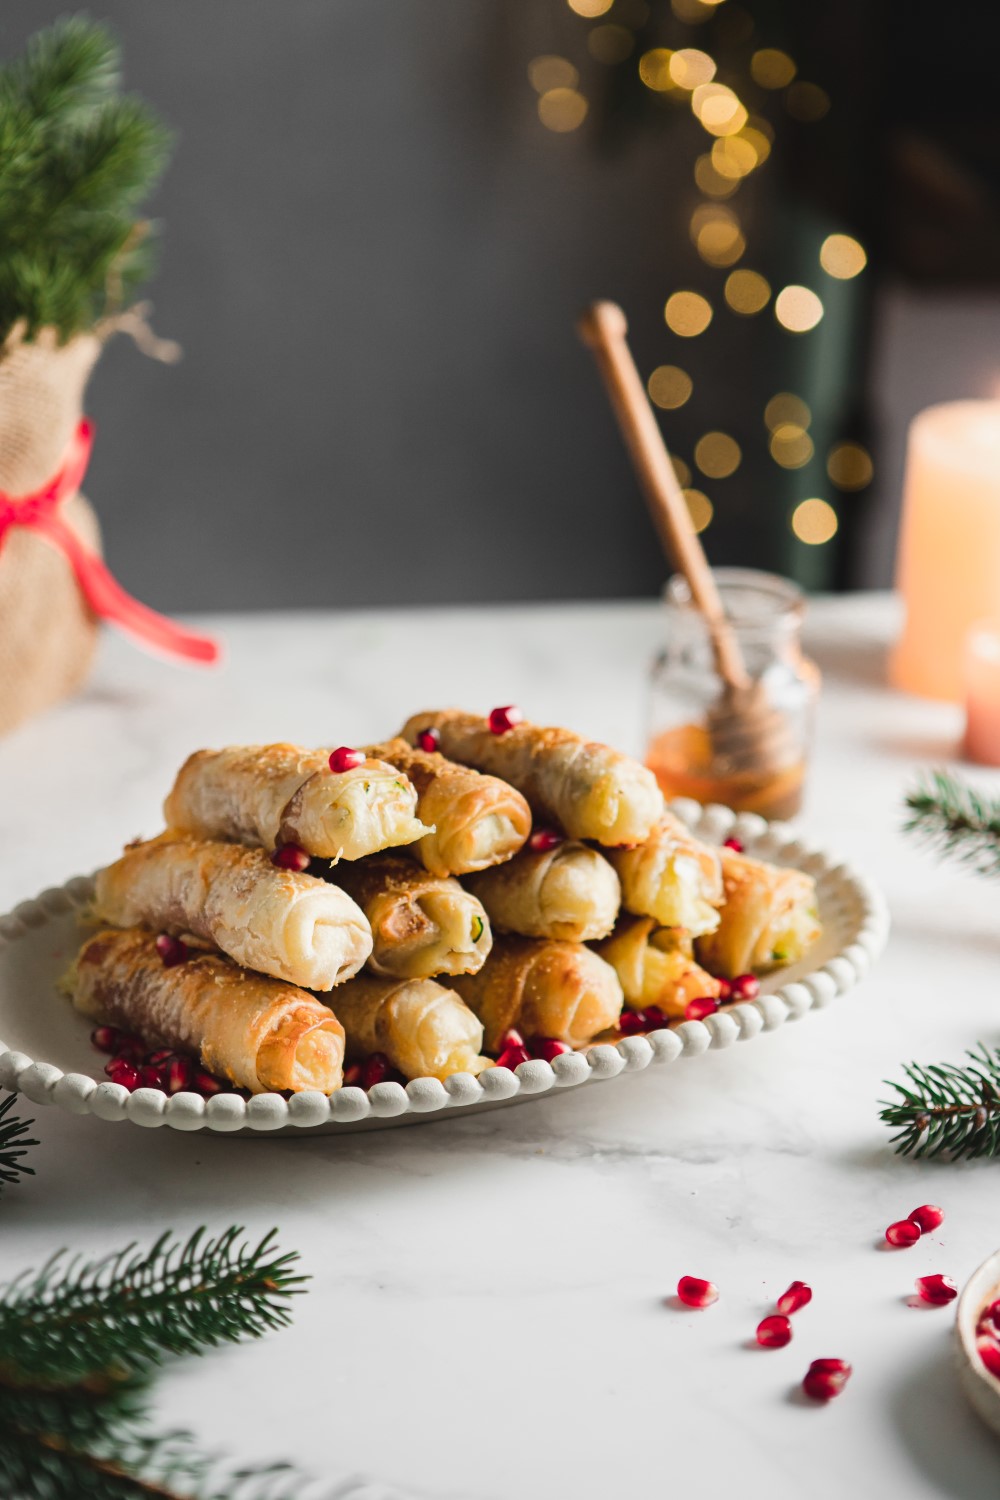 This easy and quick festive prosciutto rolls recipe is what you'll be making year after year for New Year's Eve dinner.